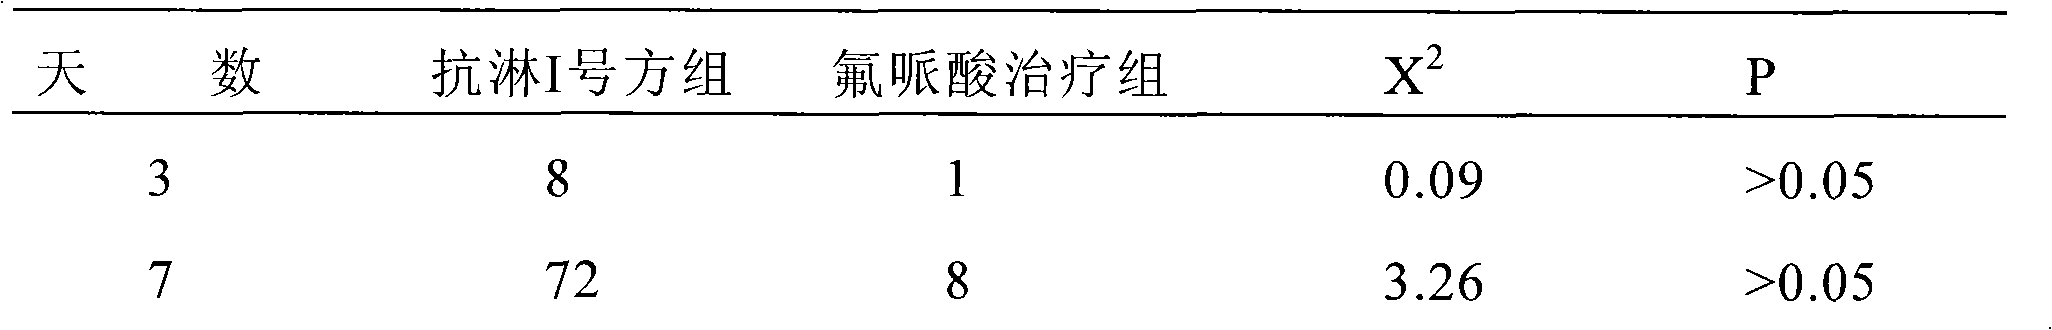 Chinese composition for treating urinary tract infection